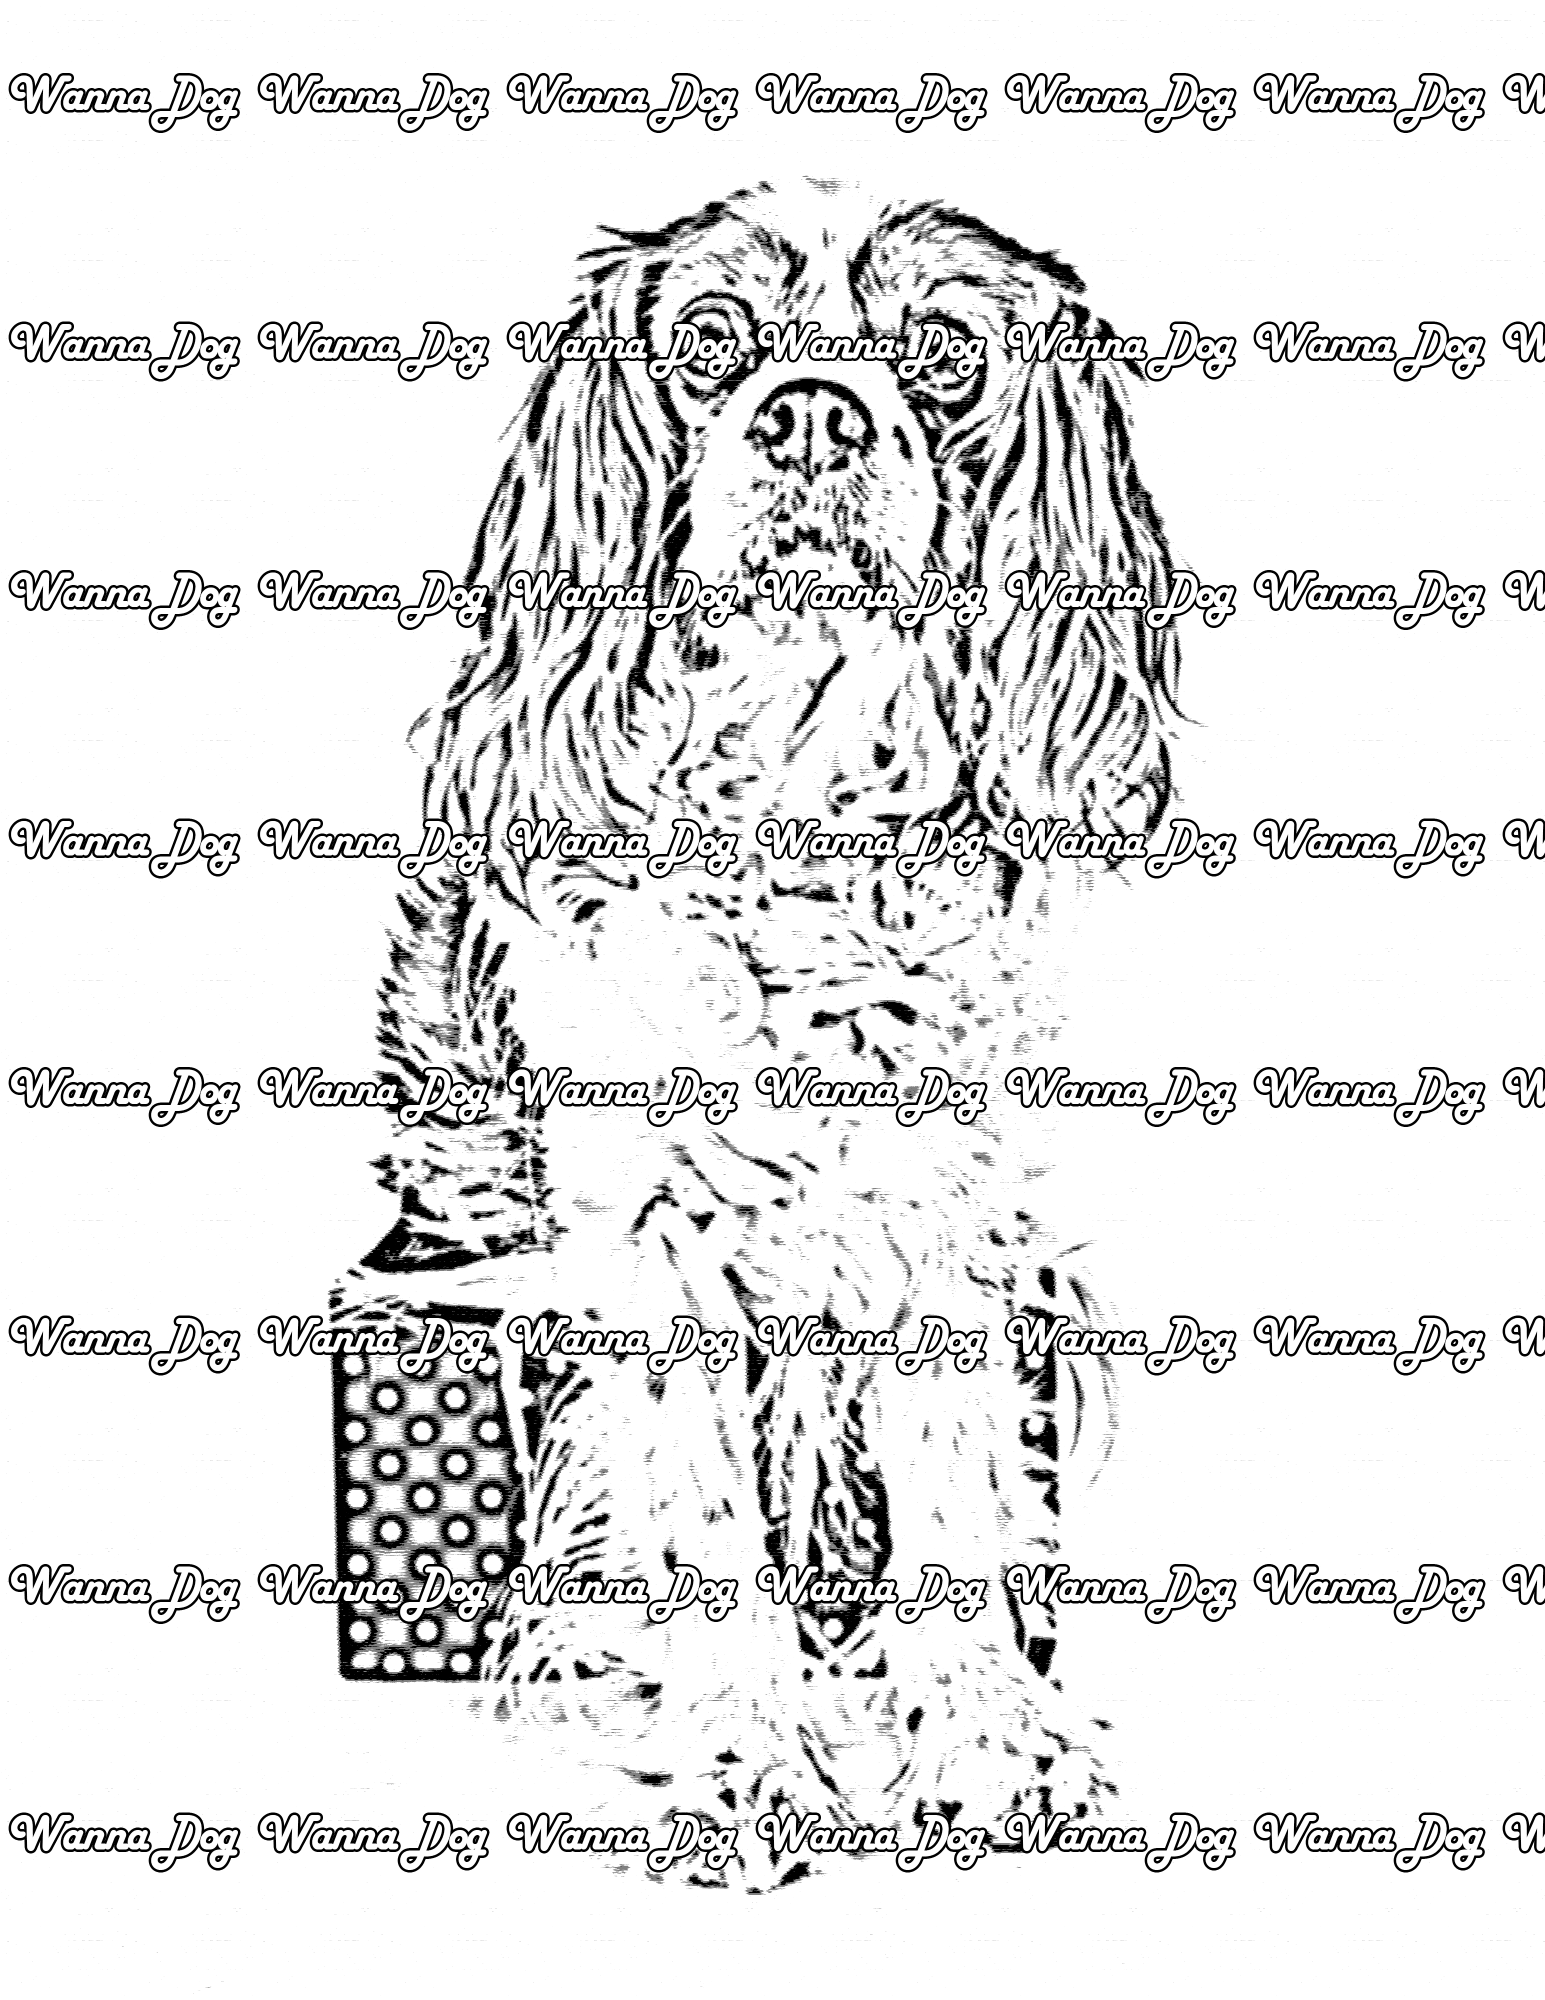 Cavalier King Charles Spaniel Coloring Page of a Cavalier King Charles Spaniel sitting in a box